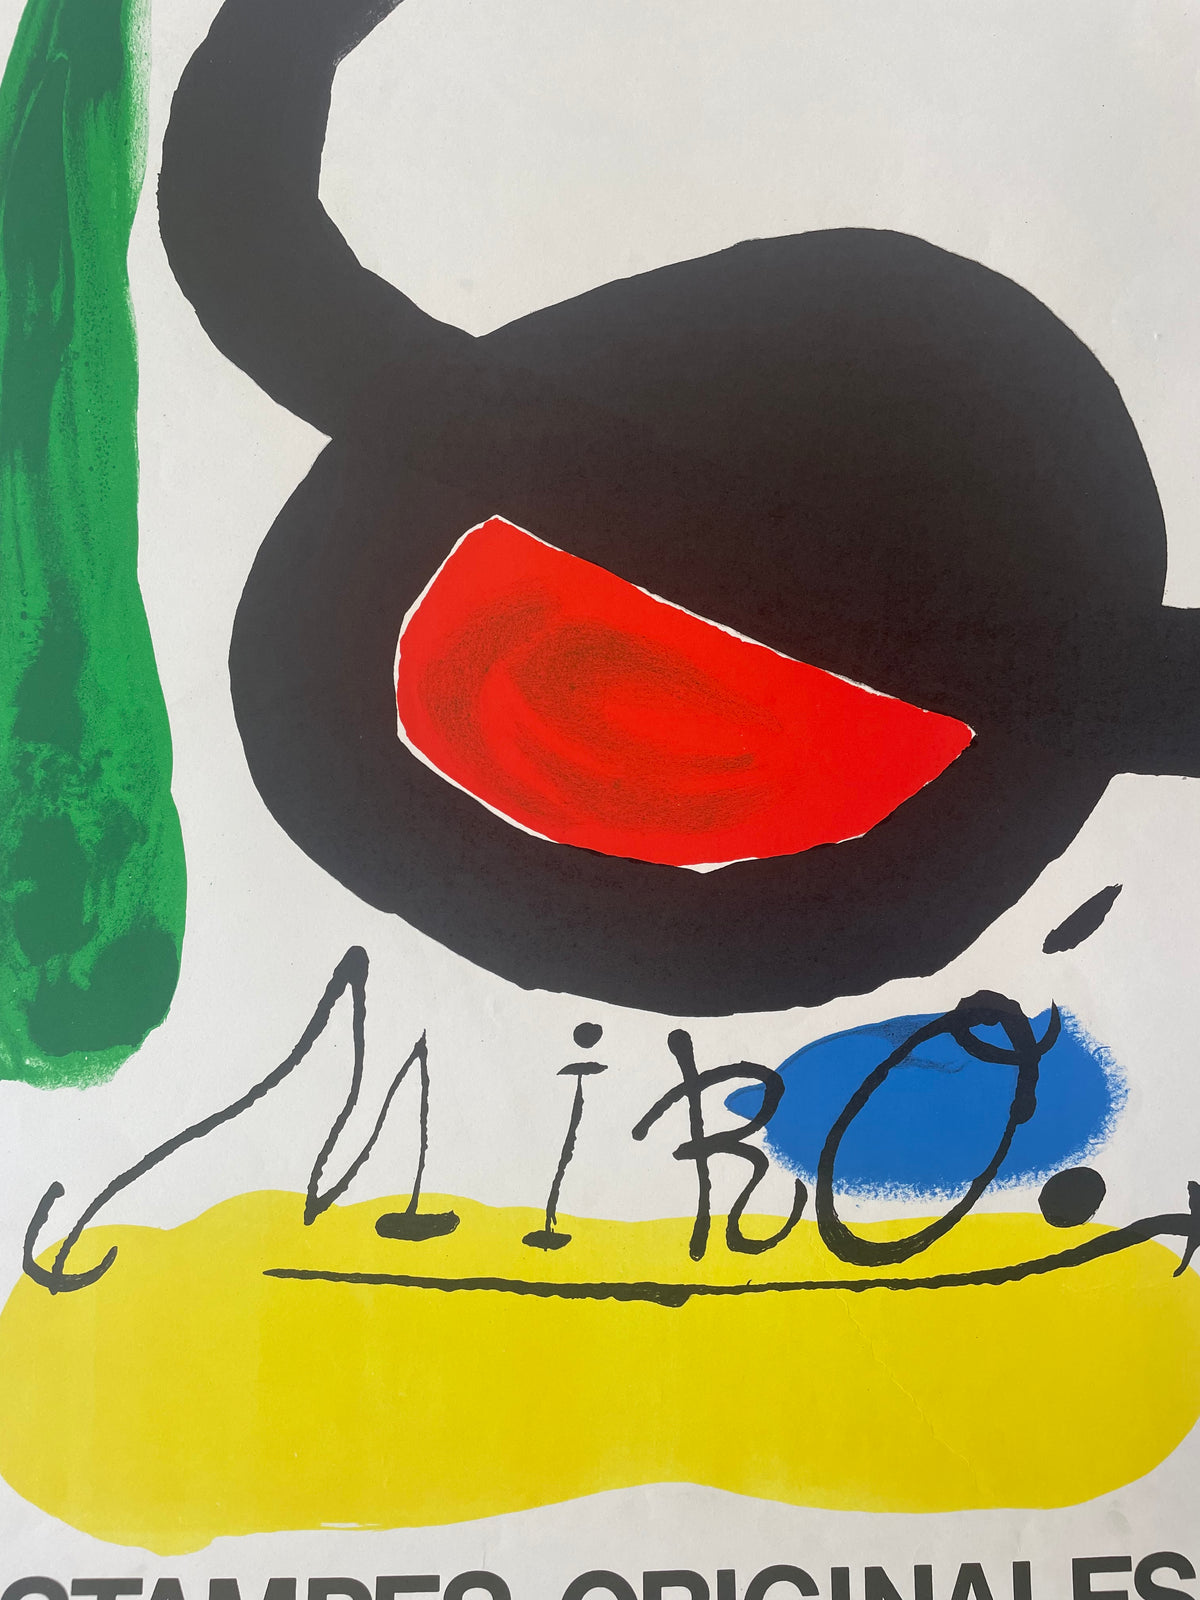 Expo 67 - Vision Nouvelle by Miro